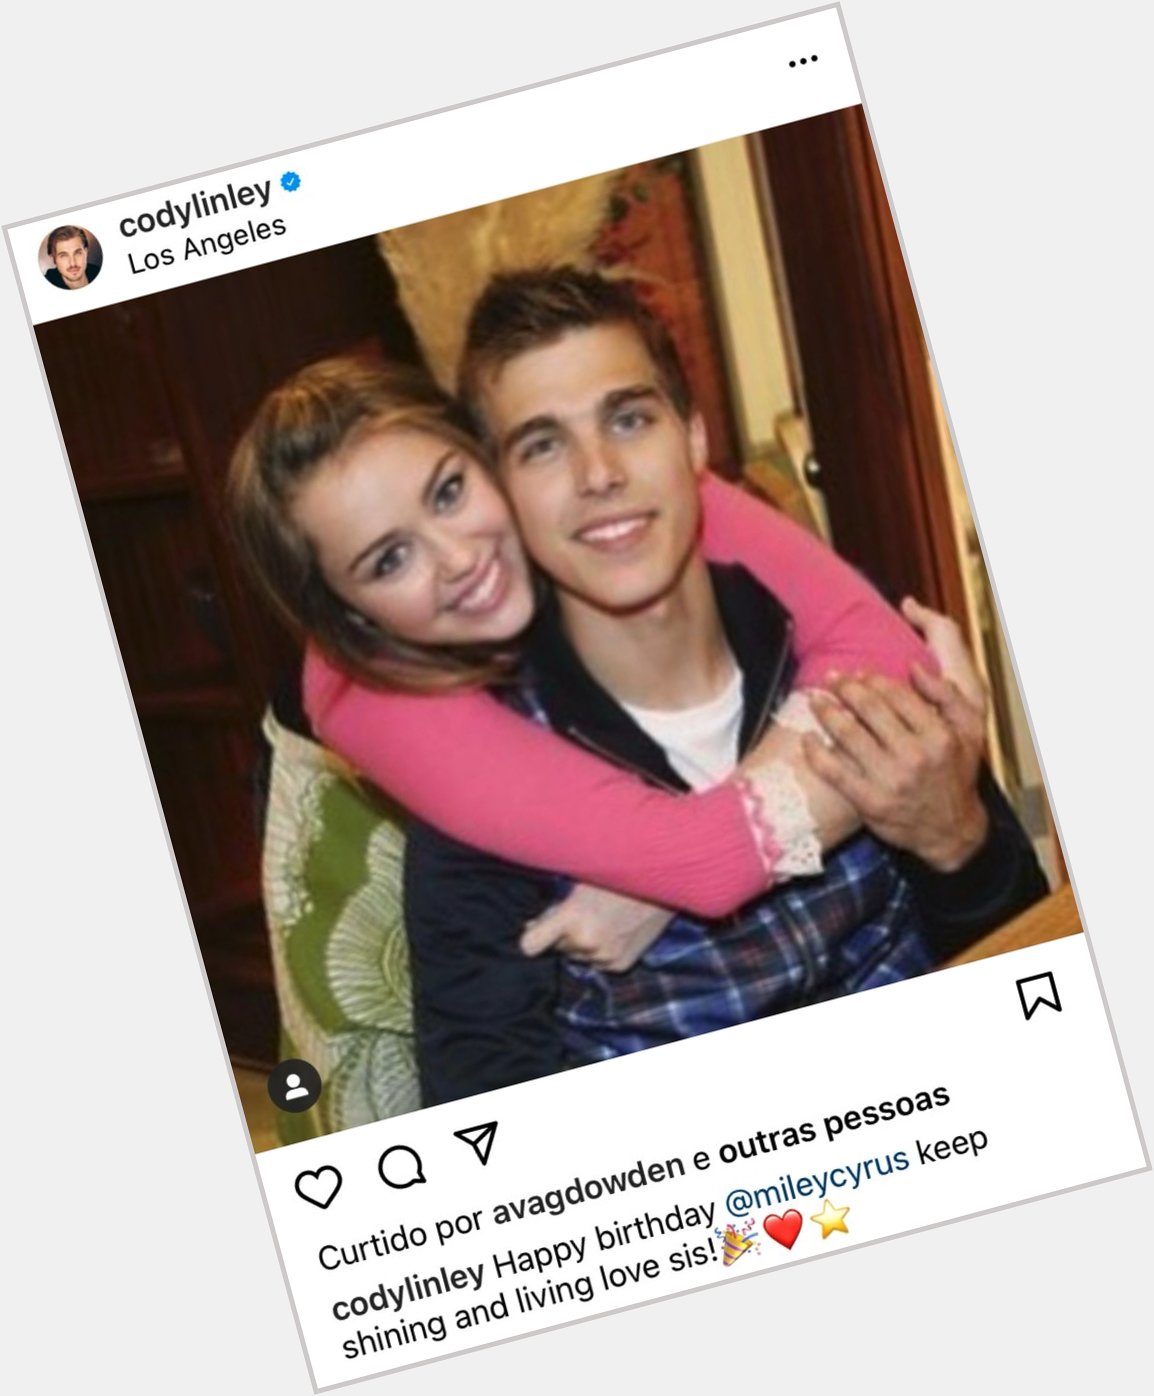 Cody Linley just wished a Happy Birthday to Miley on Instagram Keep shining and living love sis  